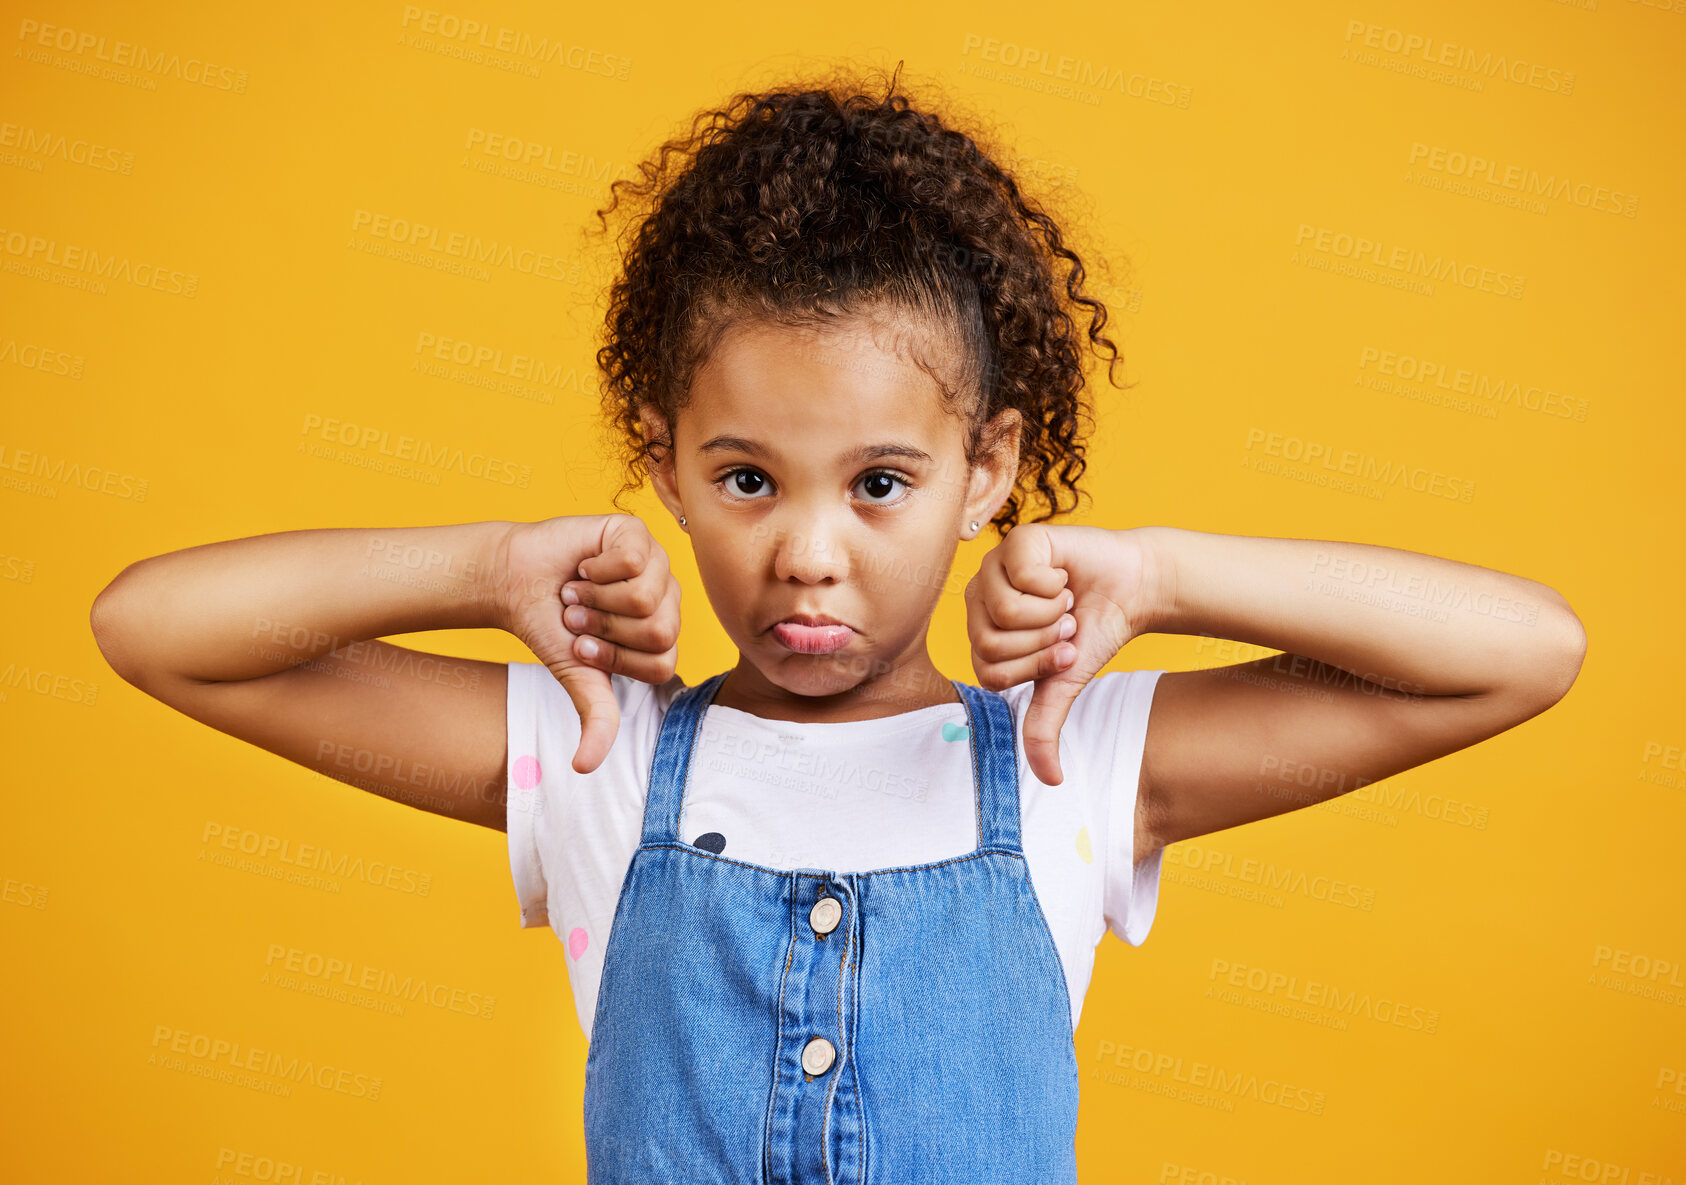 Buy stock photo Sad, negative and portrait of a child with a thumbs down isolated on a studio background. Unhappy, fail and a girl kid with an emoji hand sign for frustration, disappointment and disagreement